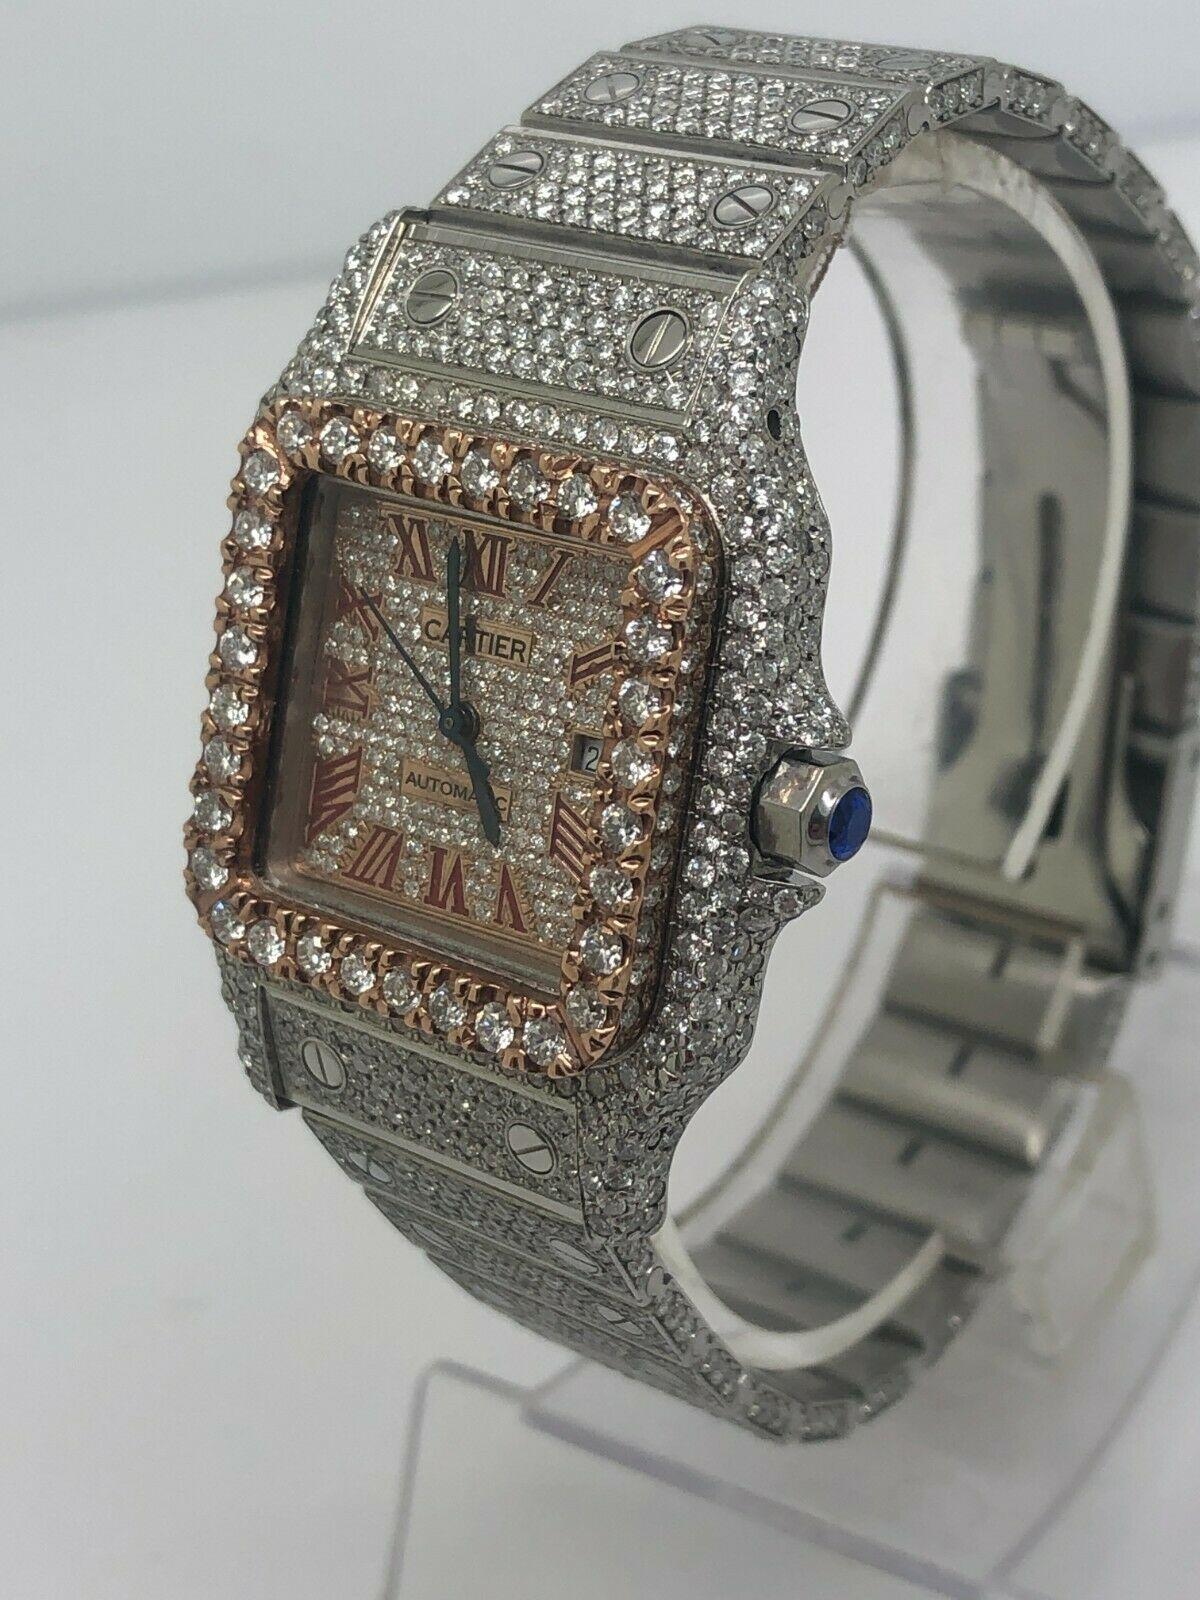 Ladies Cartier Santos 100 Two Tone rose gold/ss

!! WE HAVE EXTRA LINKS AVAILABLE!! 

15 carats of collection quality diamonds

watch runs perfect!!

This watch is 100% original Cartier 

Watch was upgraded by adding diamonds by a professional